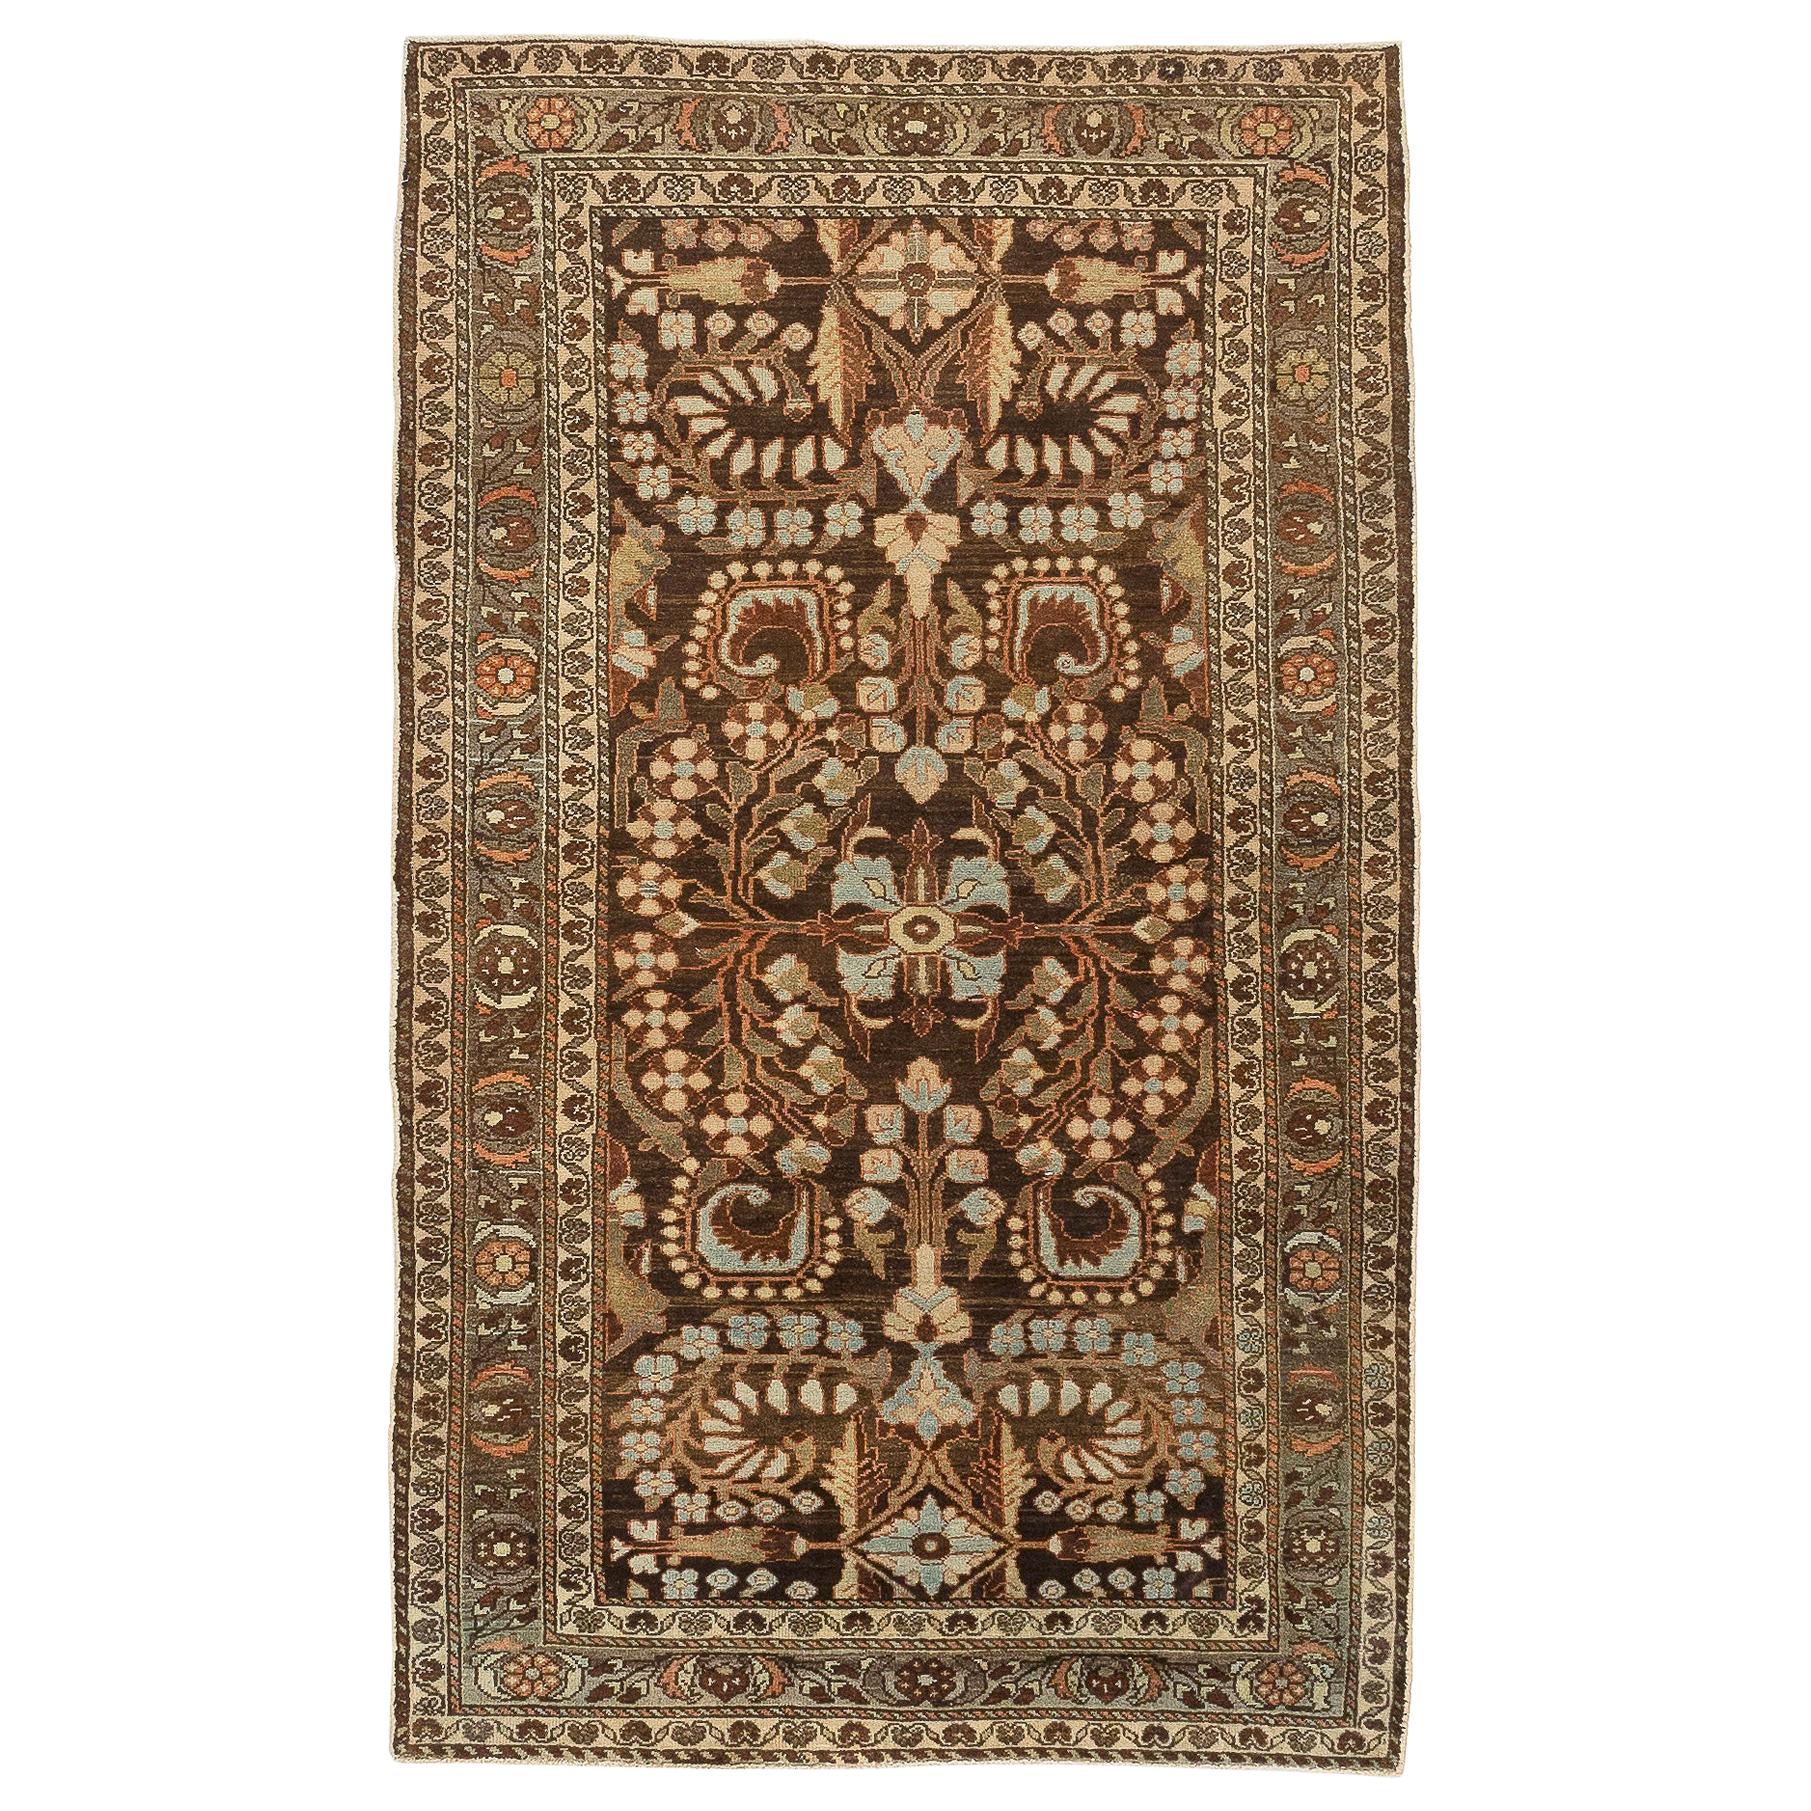 Antique Persian Hamadan Rug with Green and Blue Floral Details on Brown Field